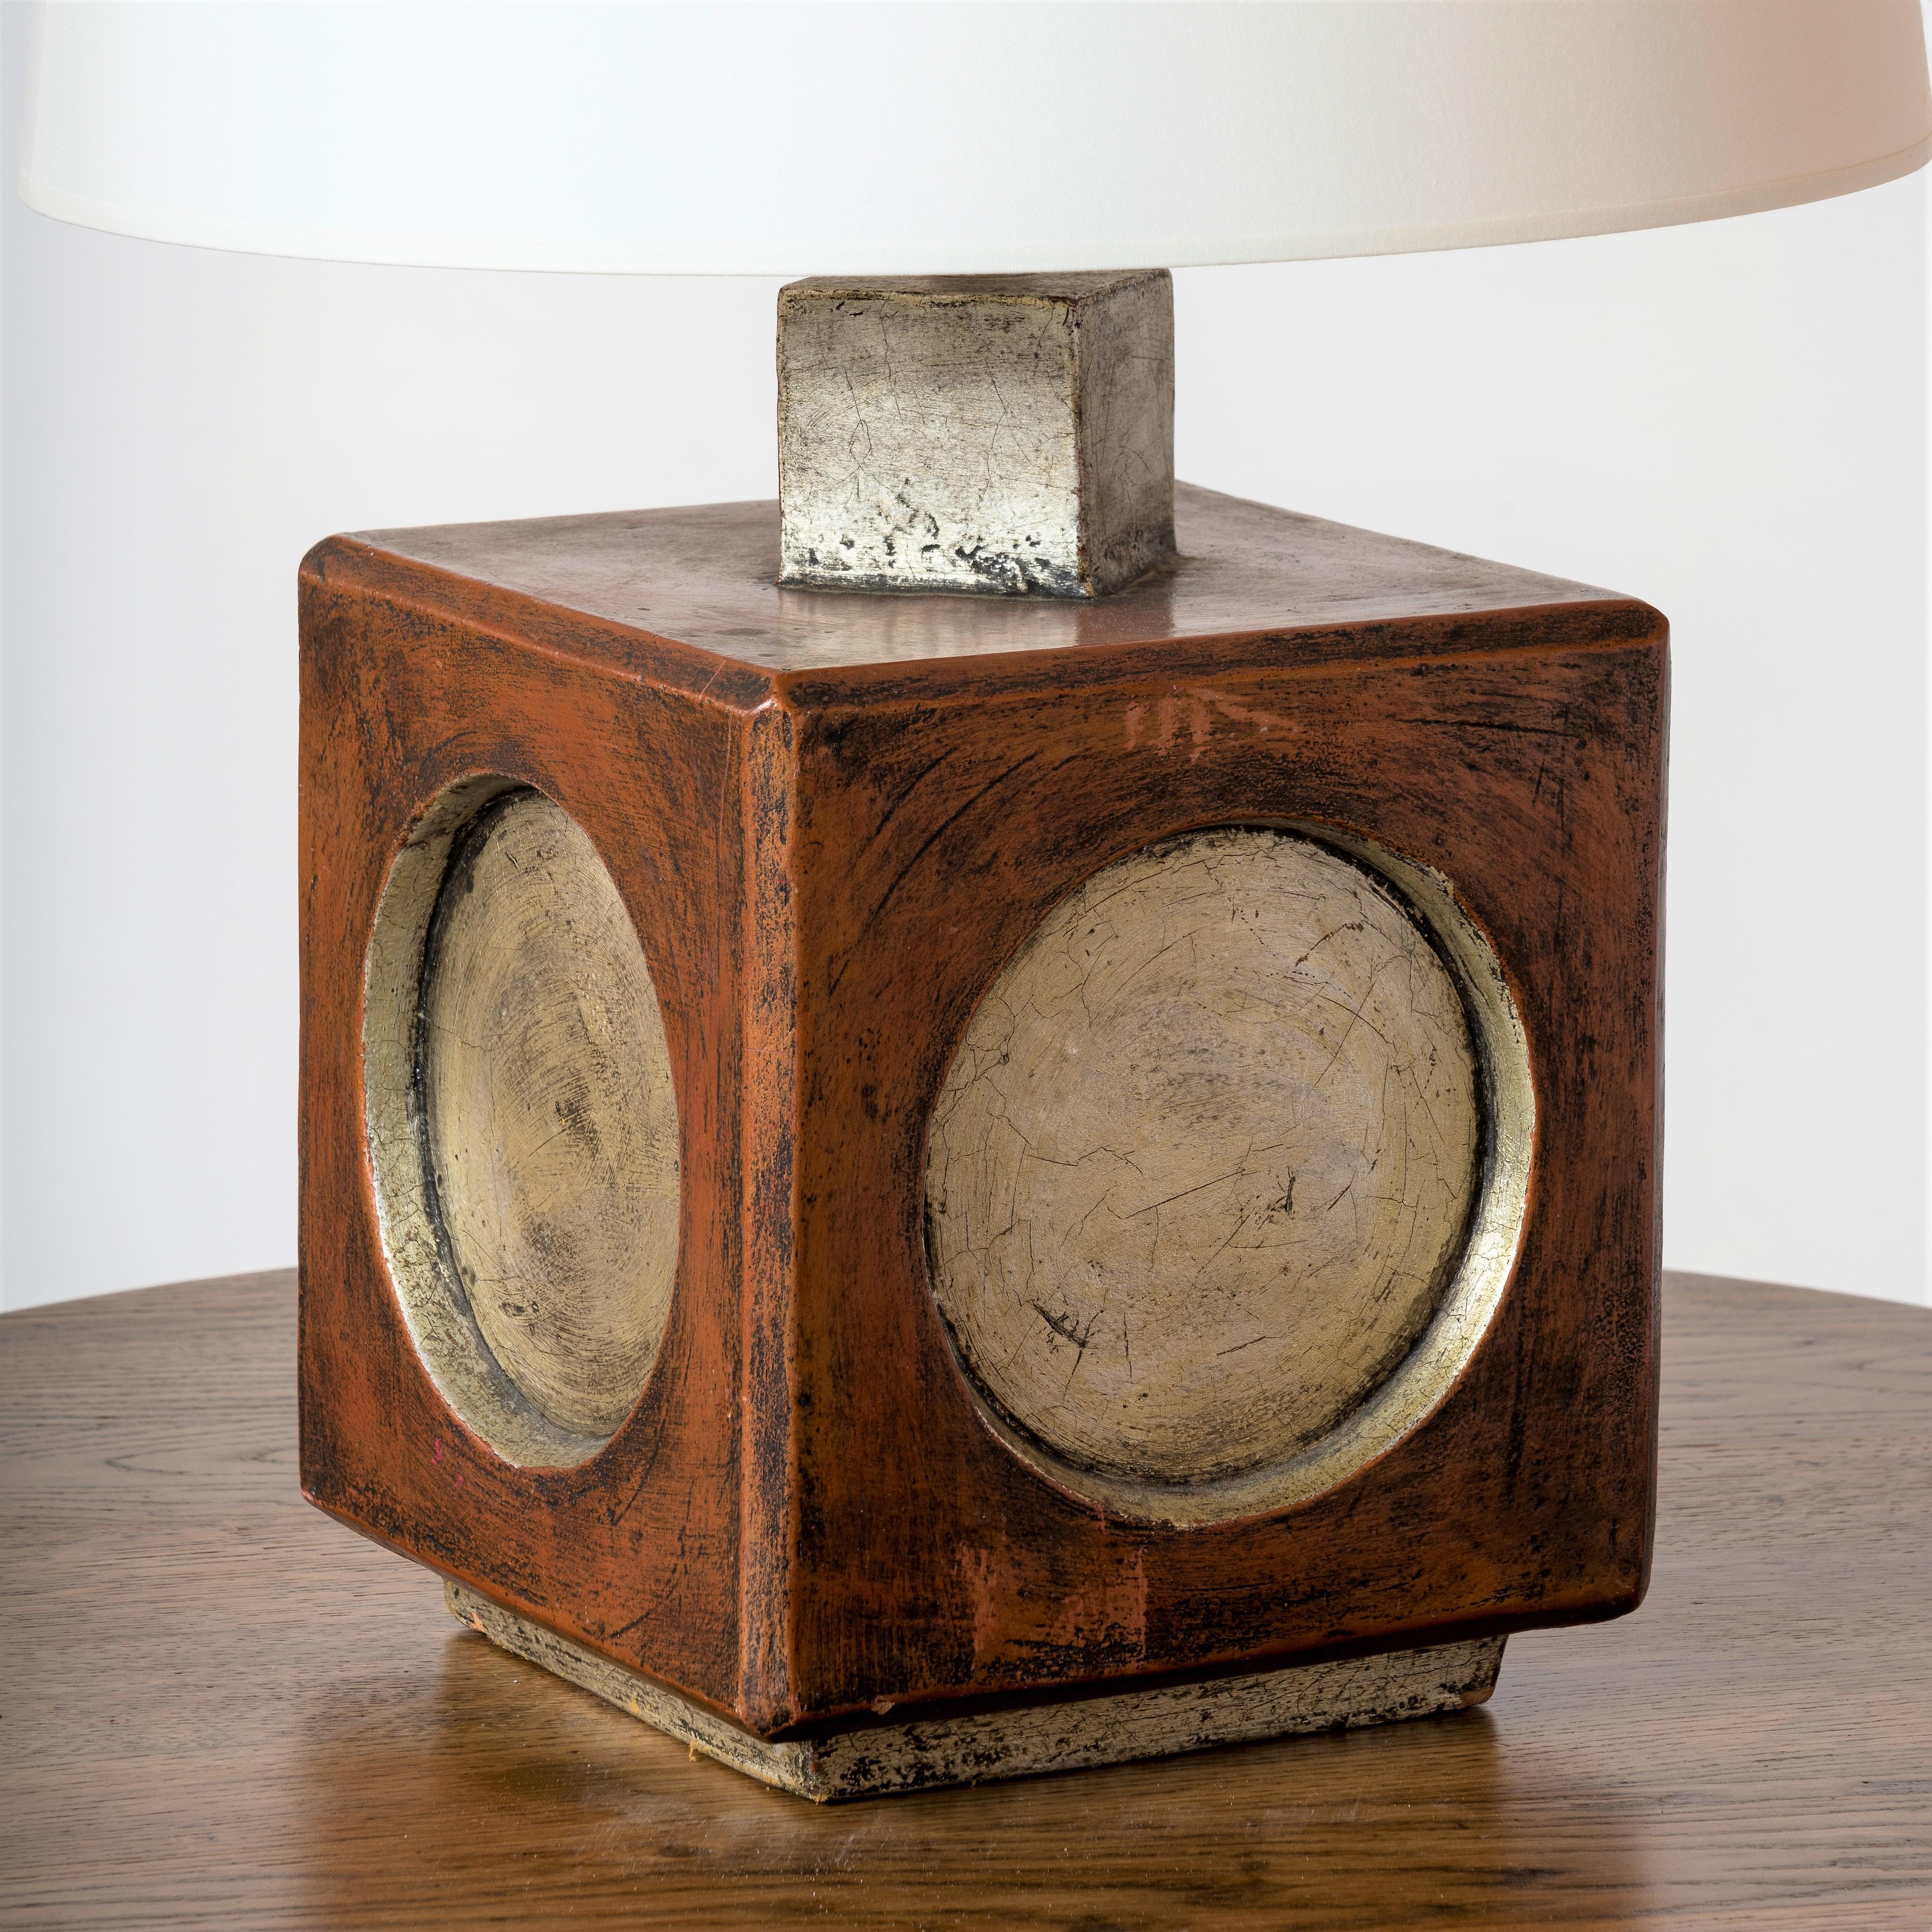 Square and faceted Italian brutaist terracotta lamp. Ochre painted base with silver painted circles on each of the four sides. 
Minor dents on base and on one edge.
European socket and wiring.
Shade for showing purposes.
This lamp will ship from